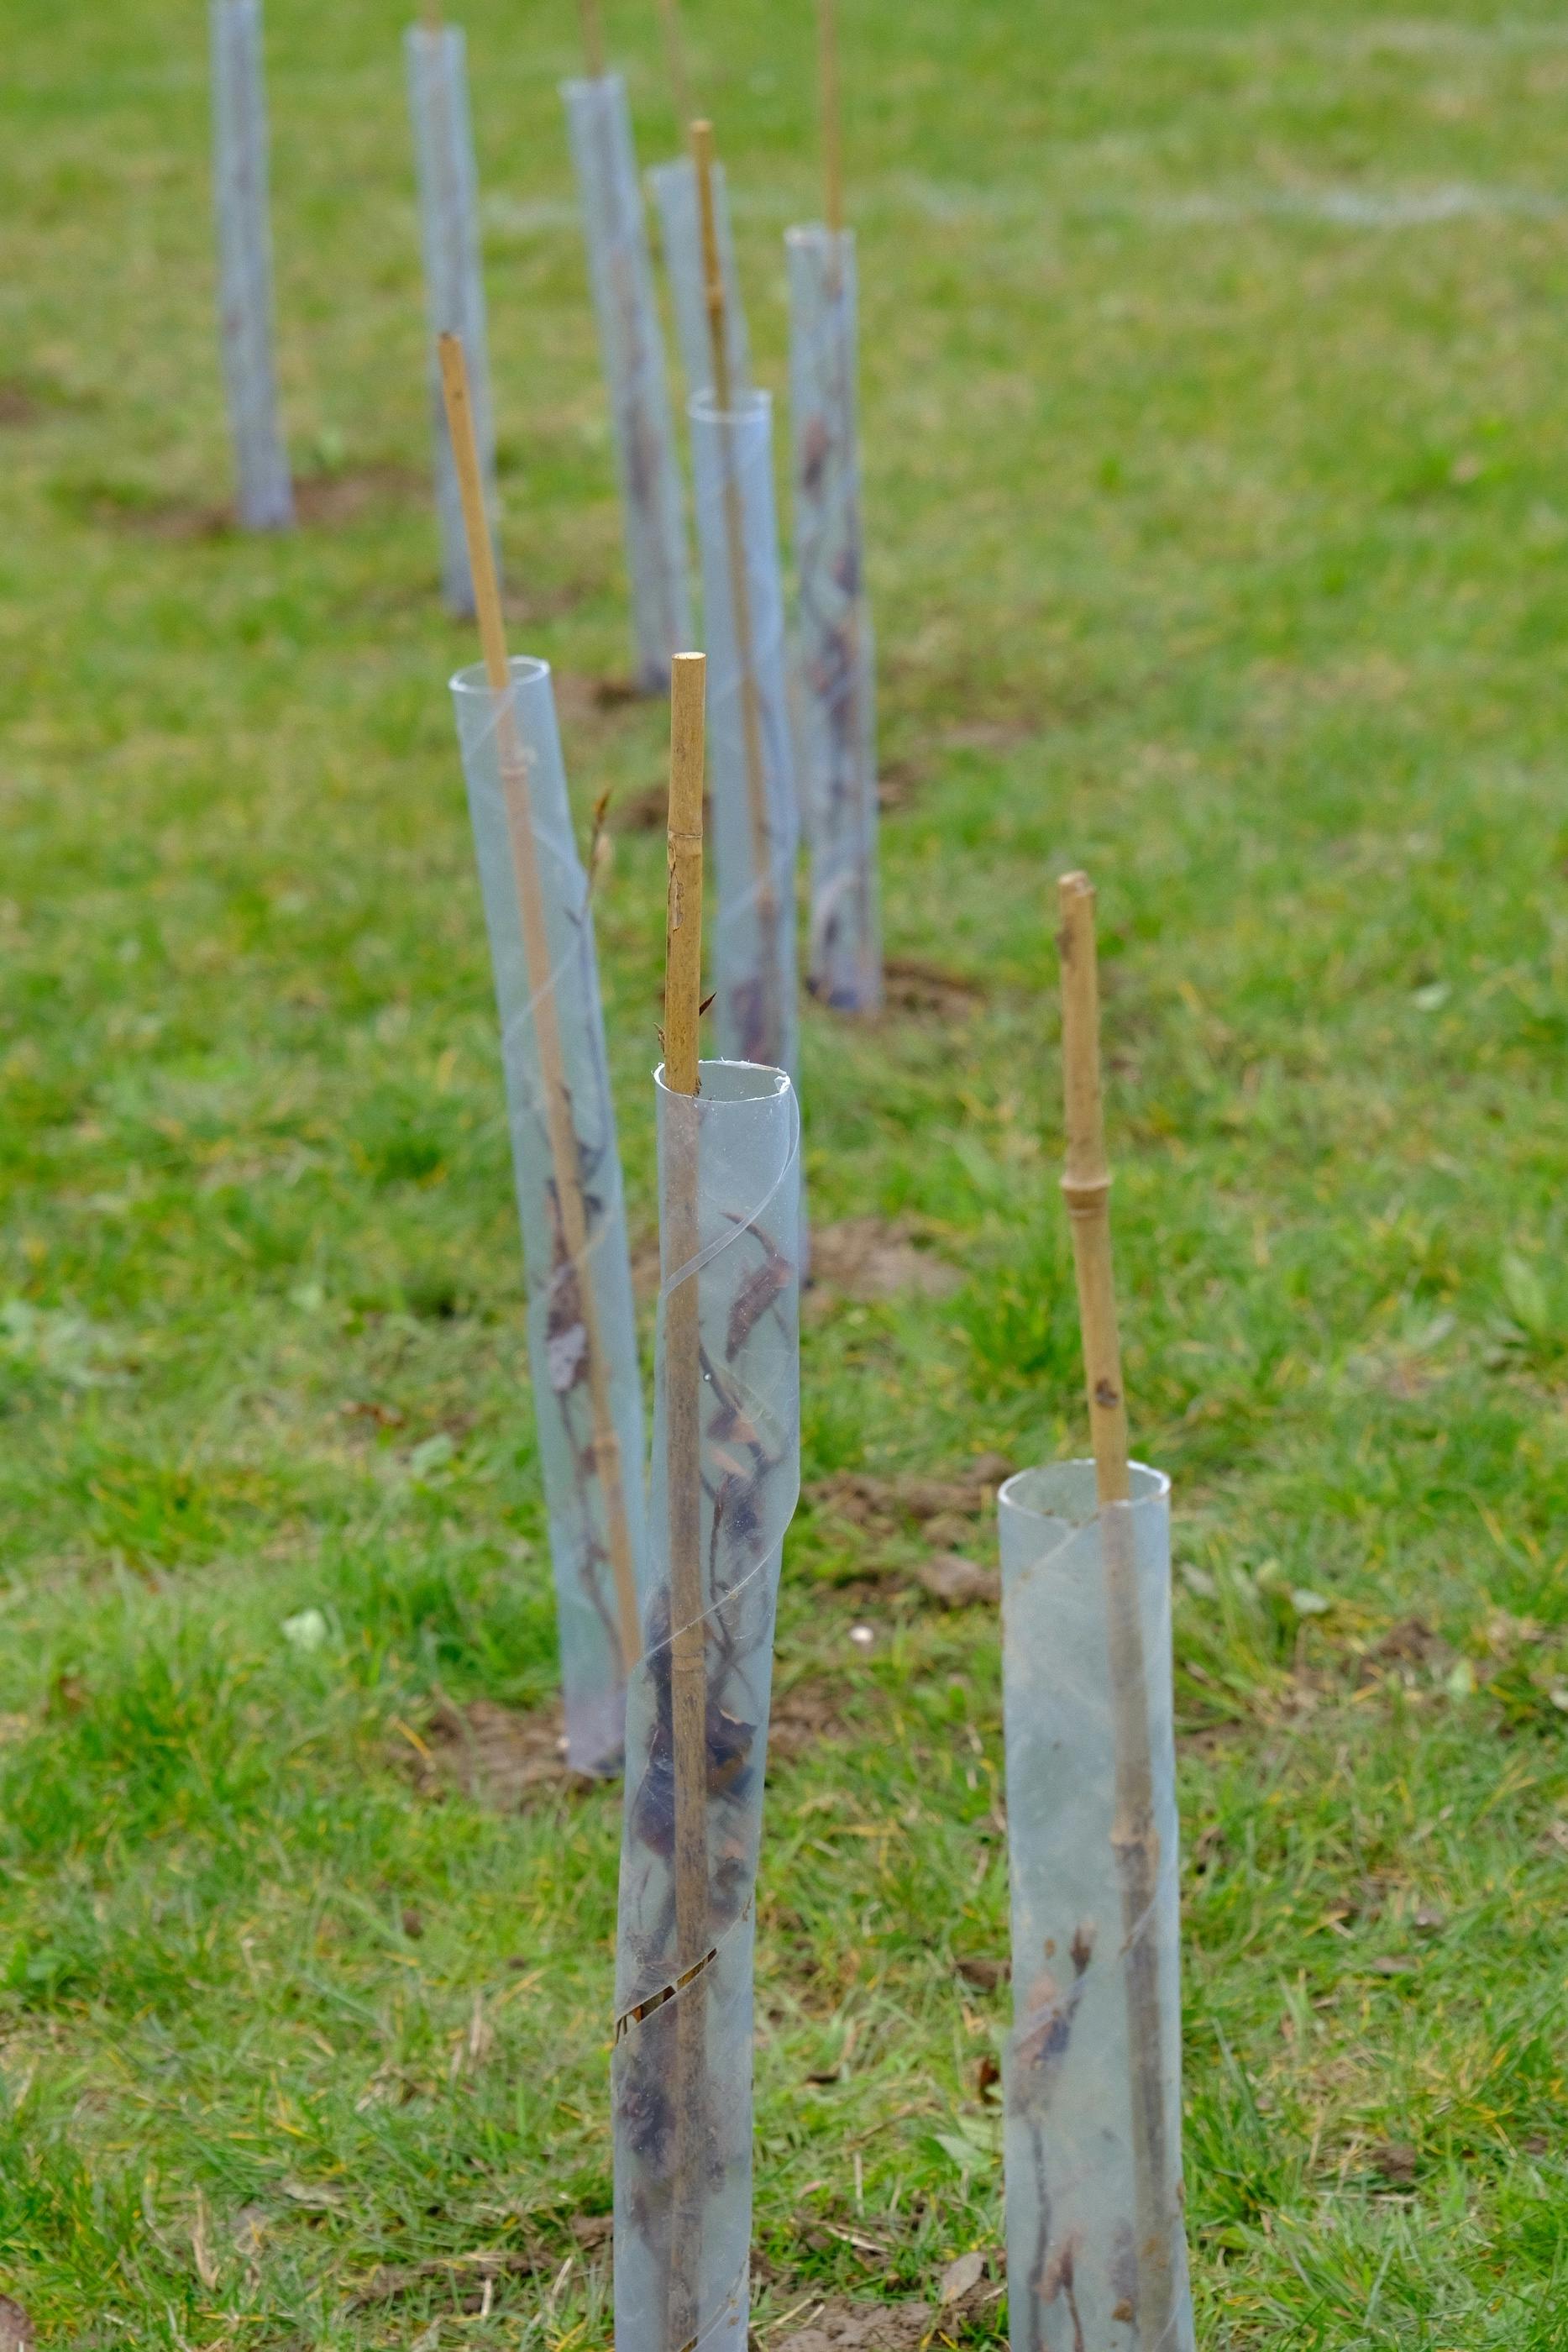 completed section of trees planted for new woodland